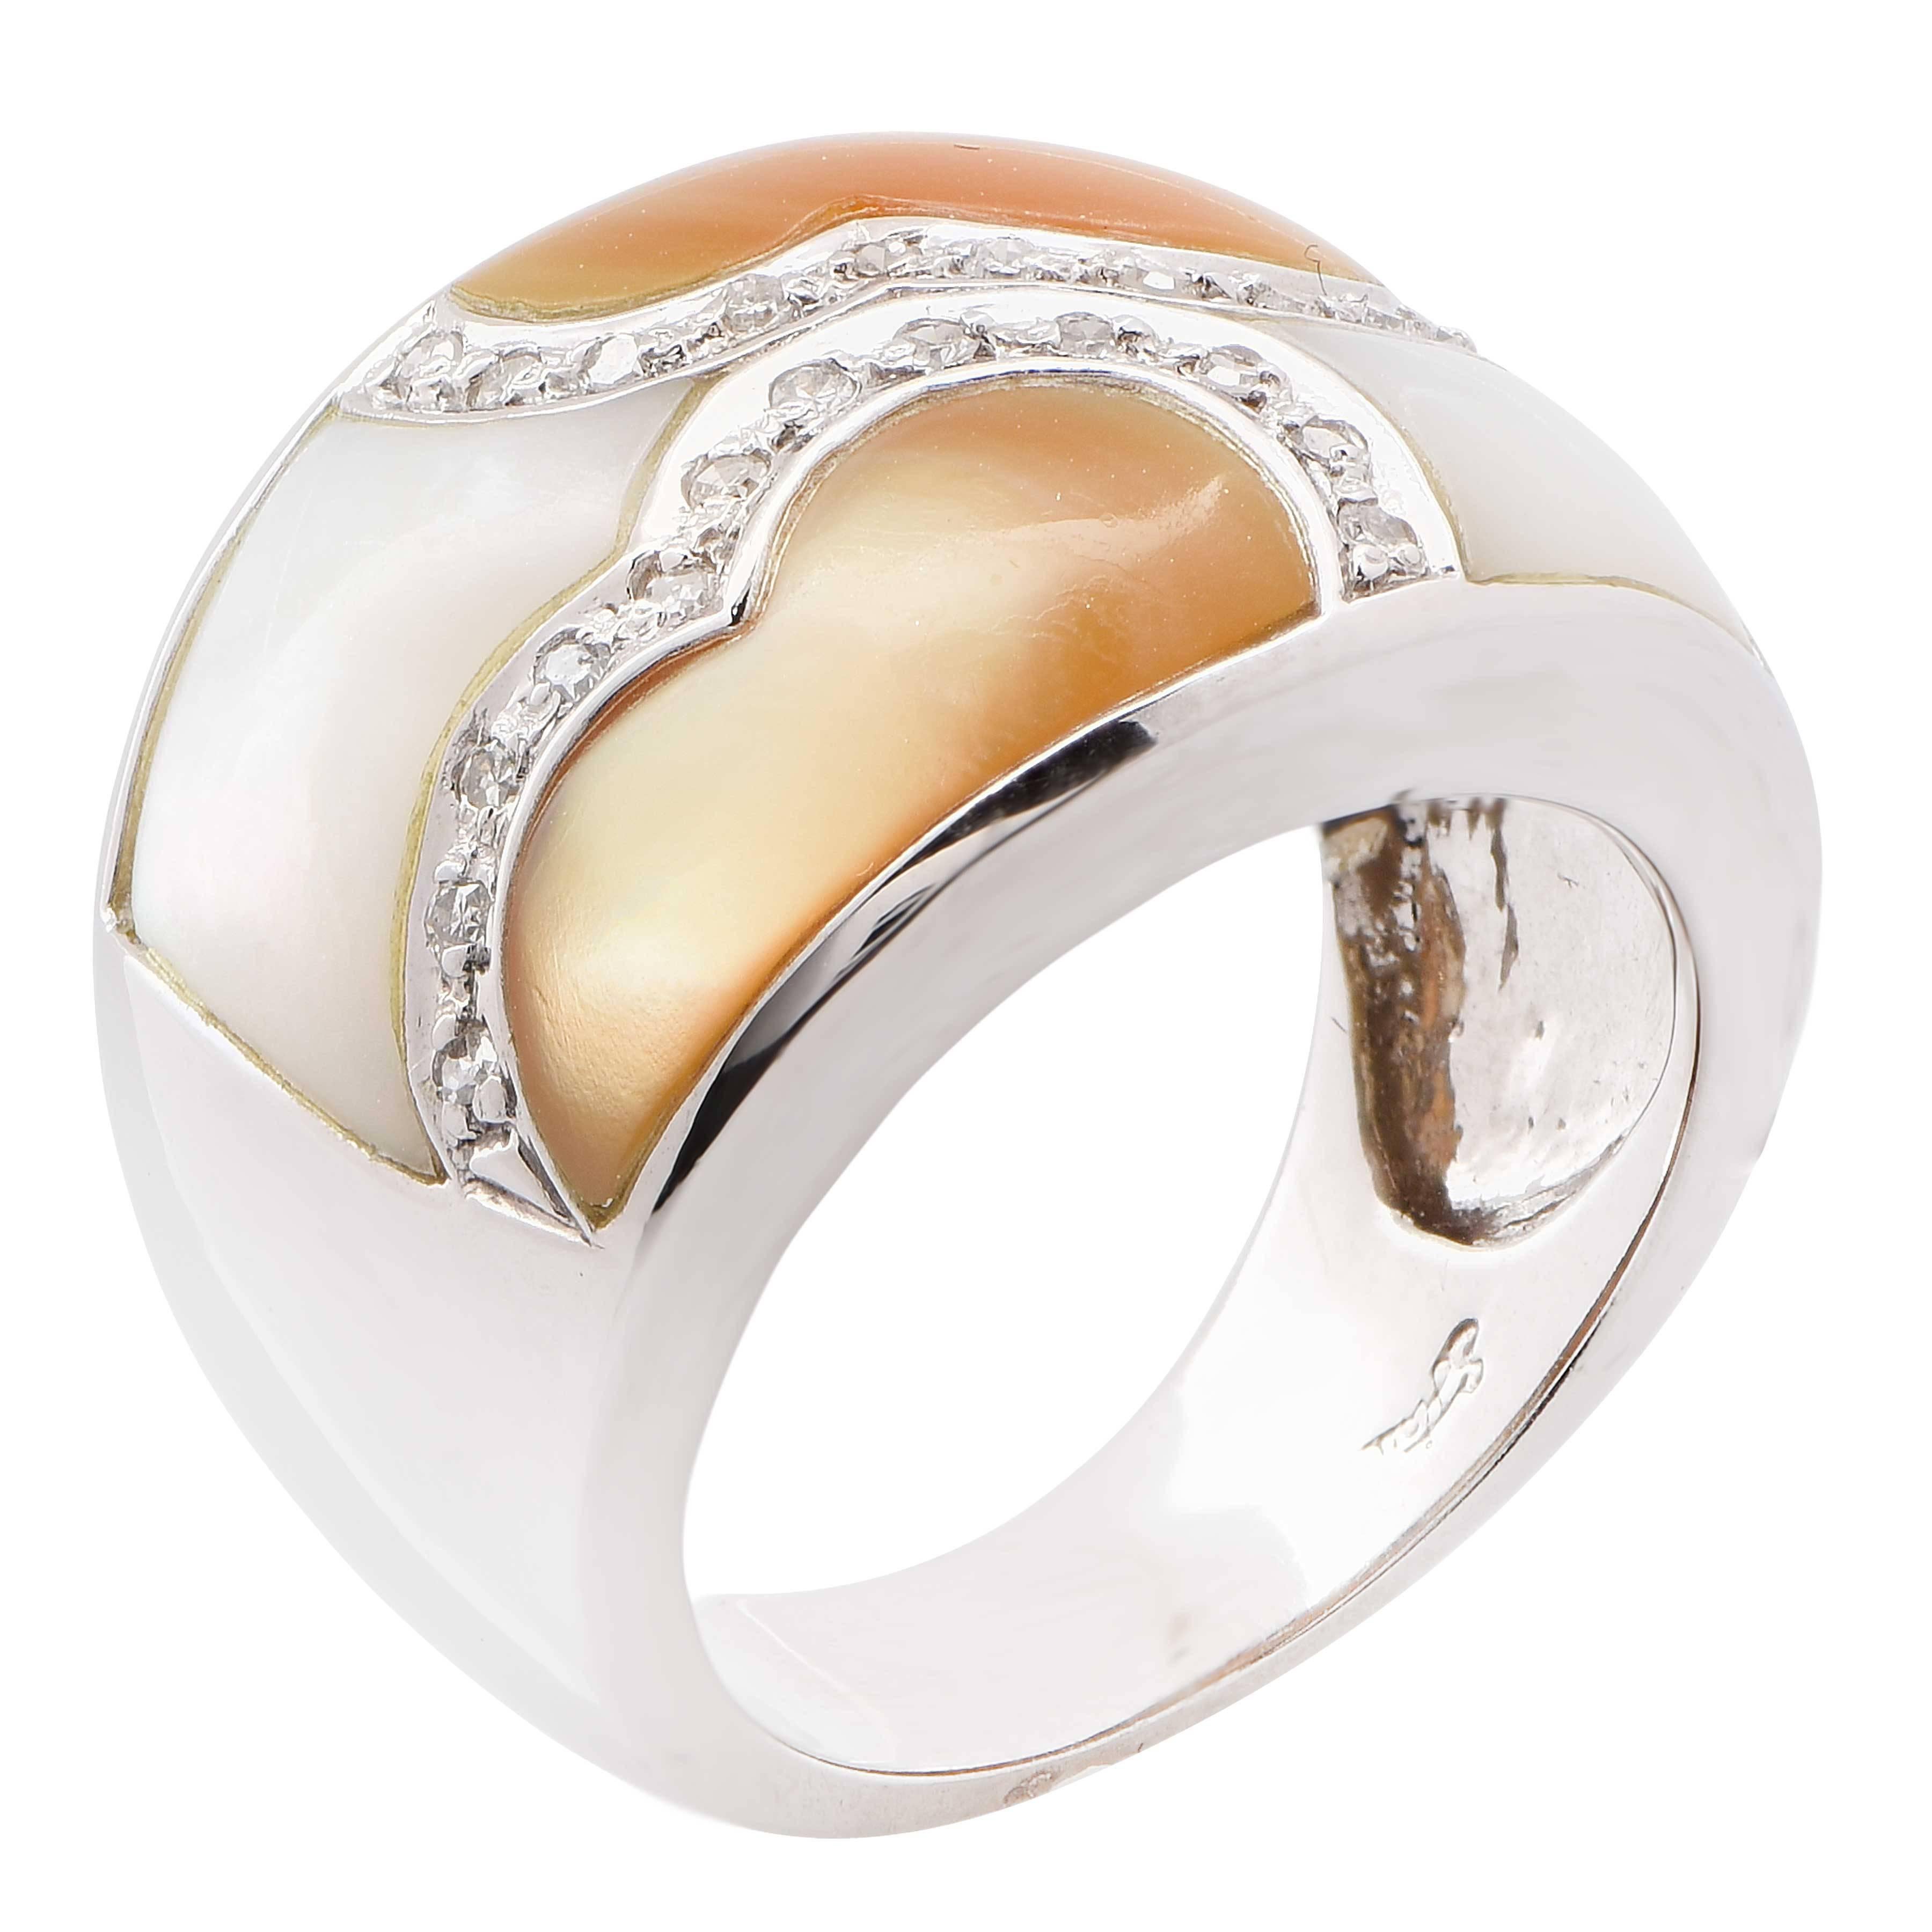 Enamel and Diamond Ring In New Condition For Sale In Bay Harbor Islands, FL